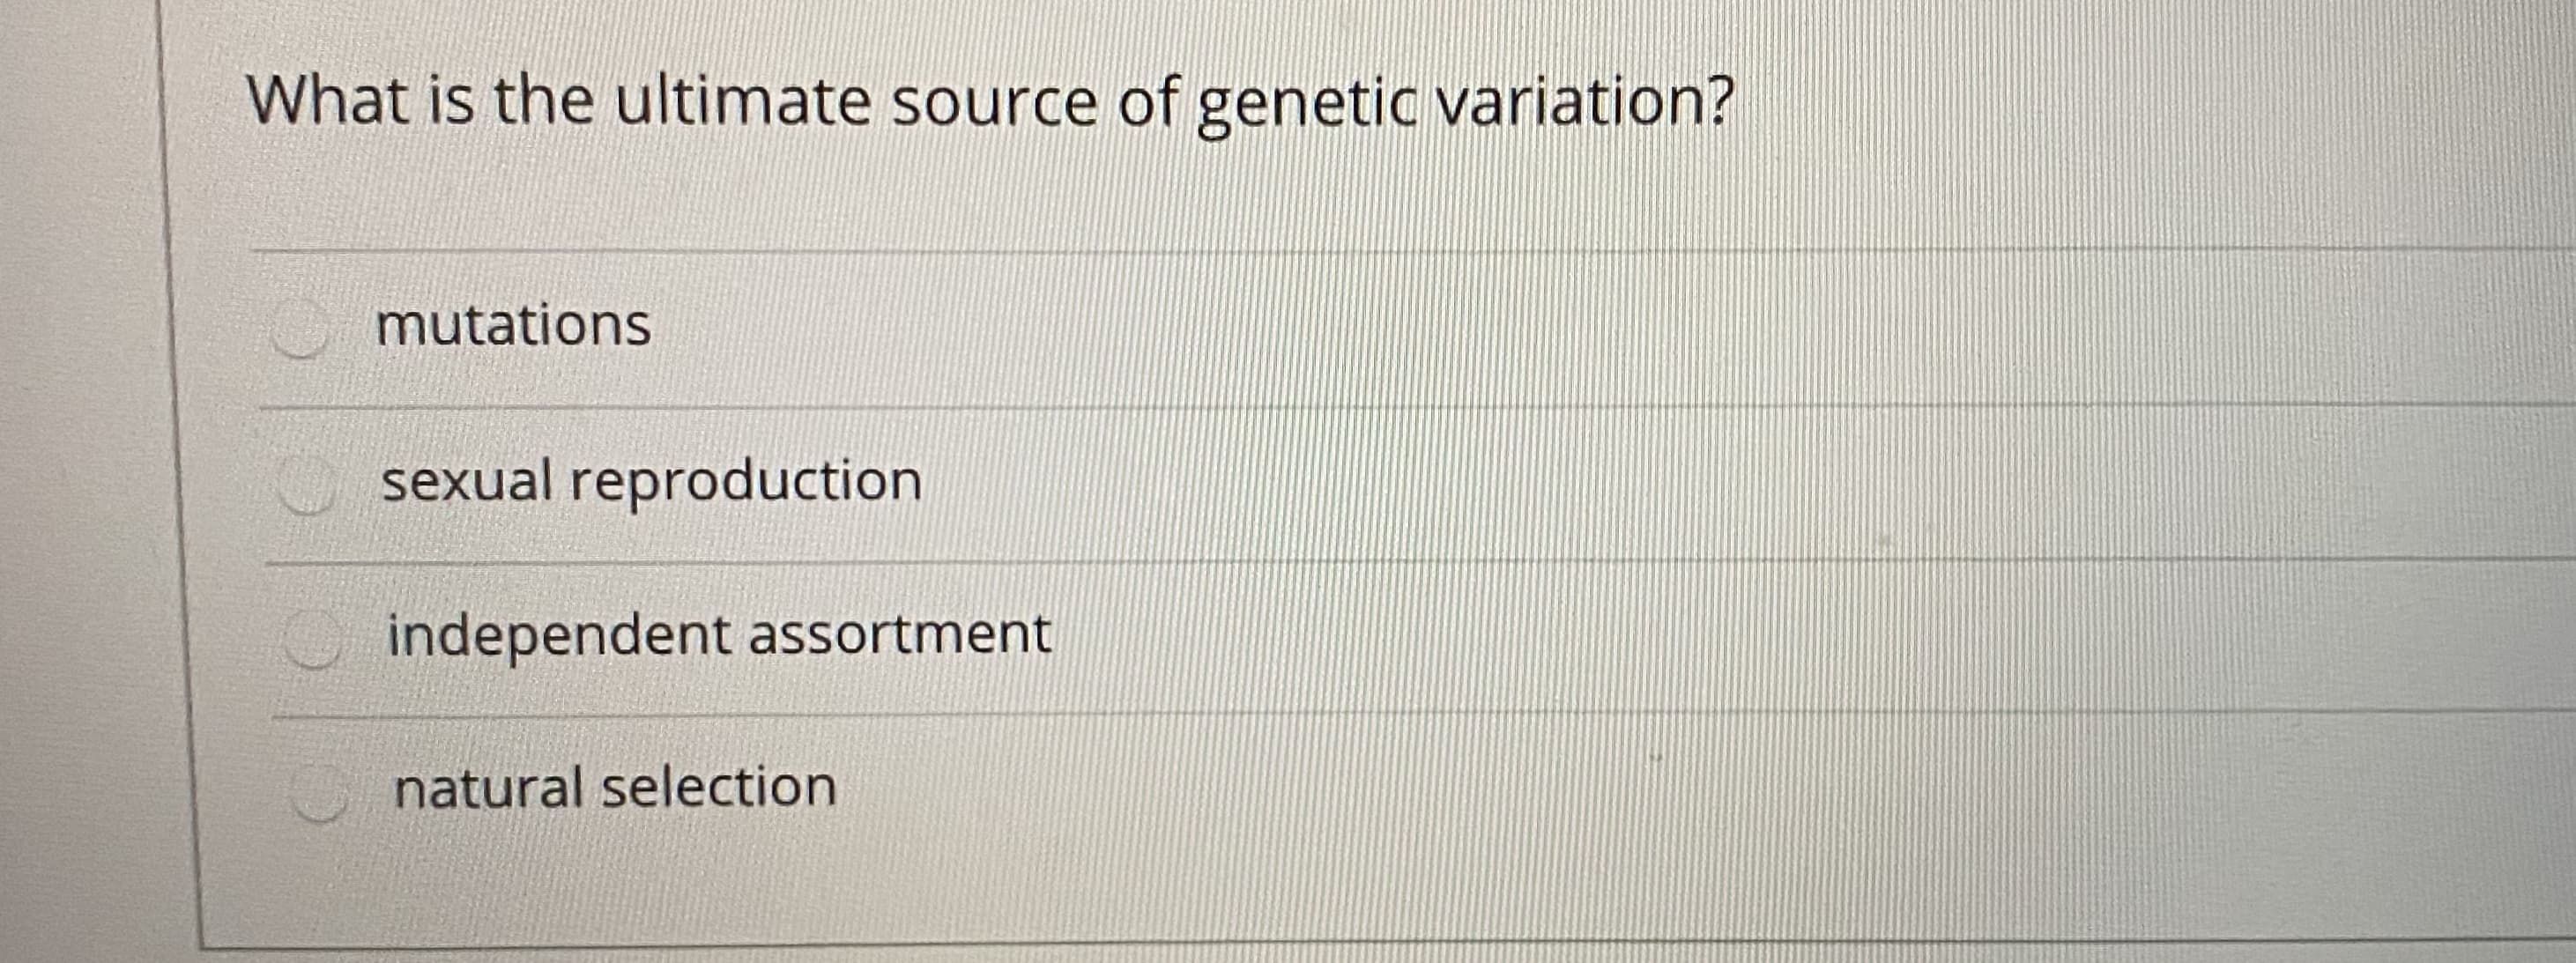 What is the ultimate source of genetic variation?
mutations
sexual reproduction
independent assortment
natural selection
